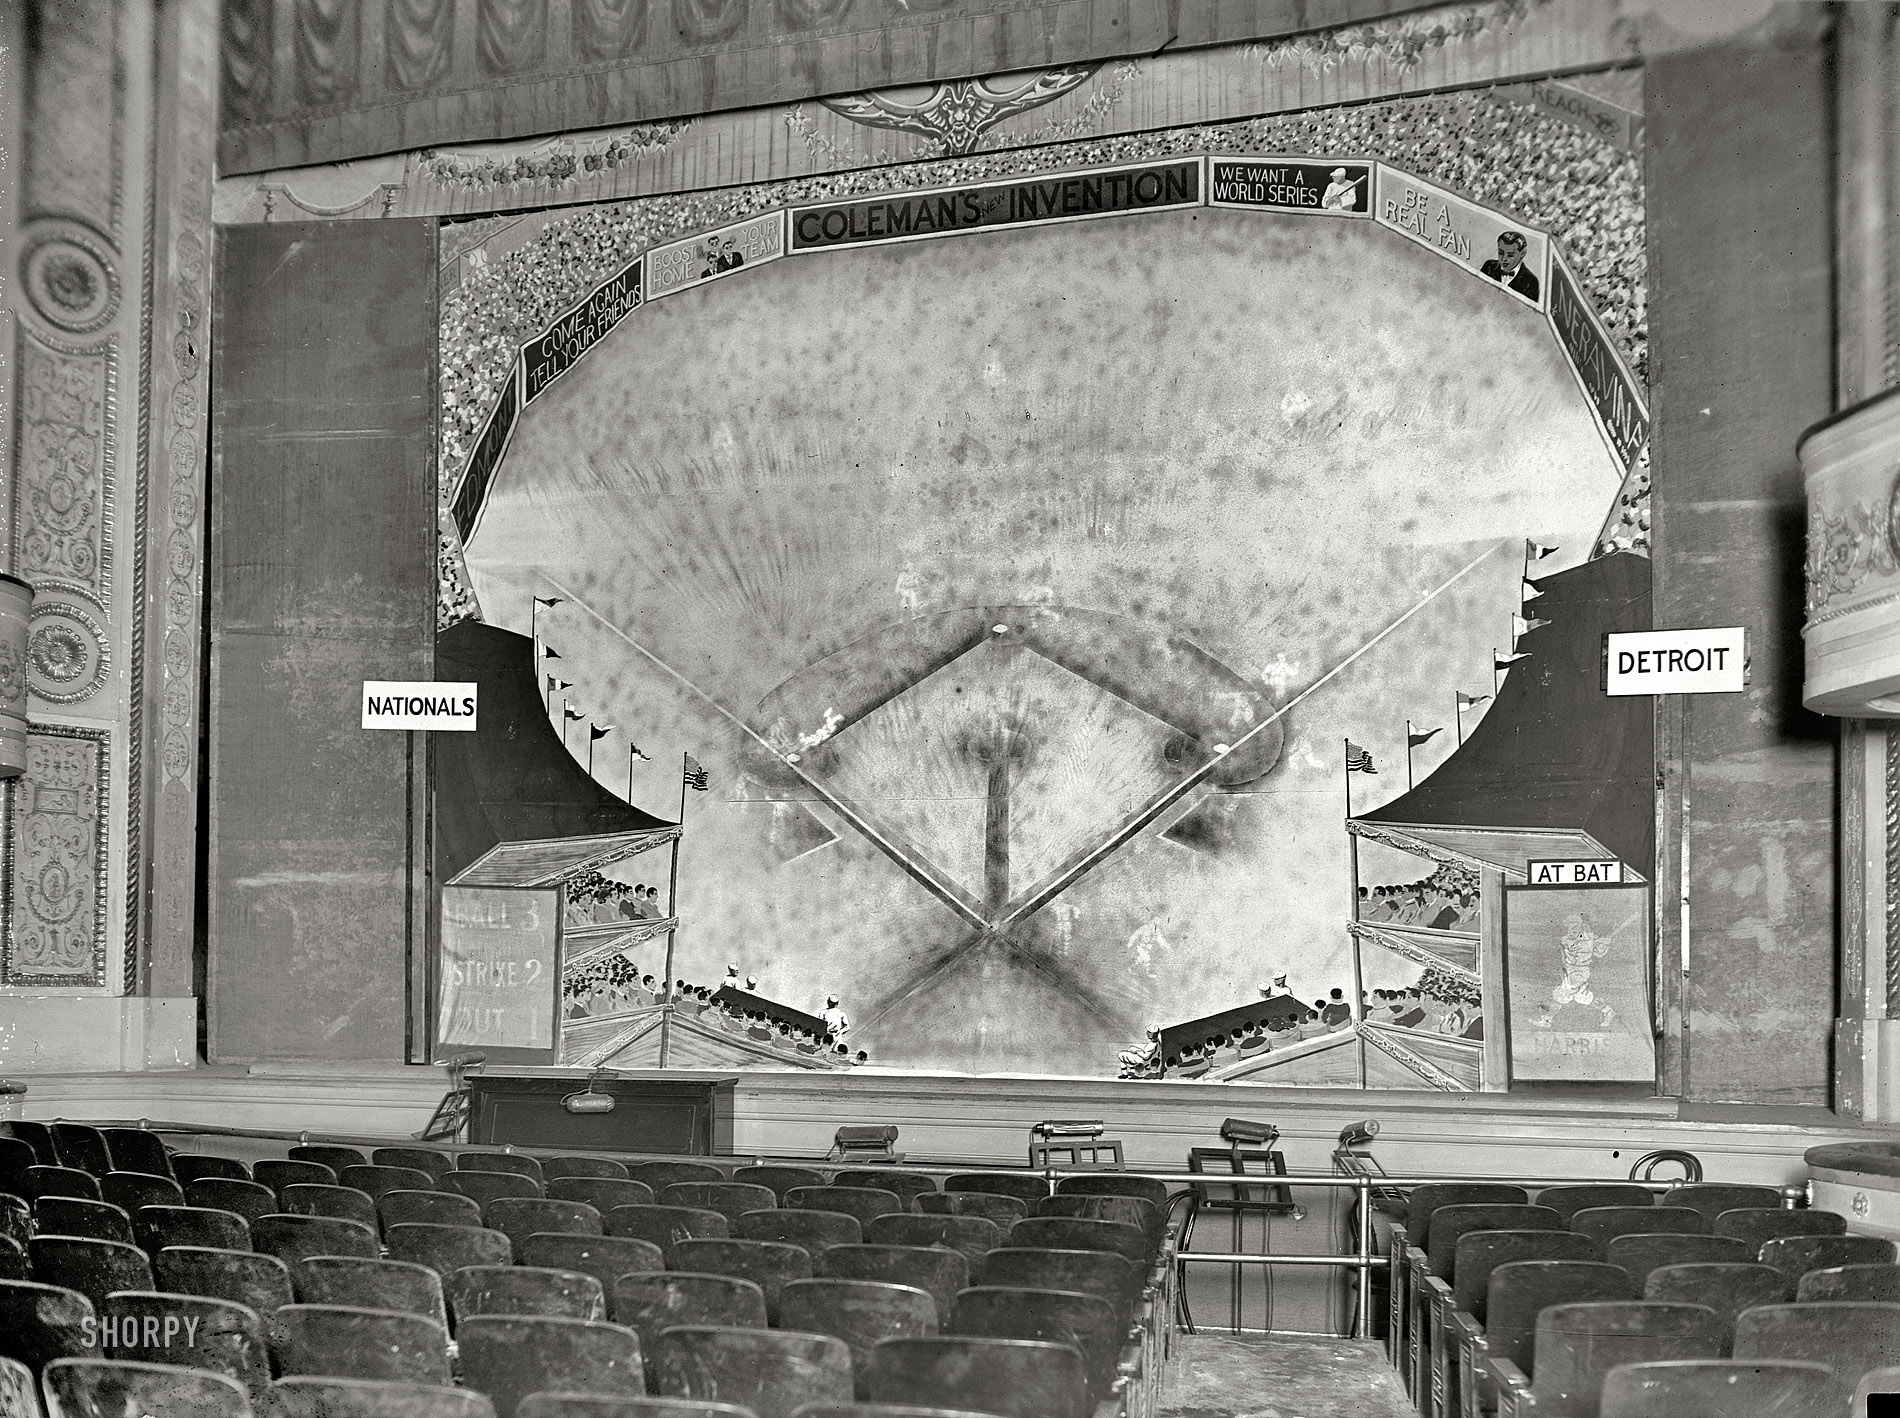 August 2, 1924. Washington, D.C. "Coleman's scoreboard invention." The Coleman Lifelike Scoreboard, with "pictures that move and play the game," made its debut at the National Theater in 1913, evidently taking 11 years to reach the state of perfection seen here. National Photo glass negative. View full size.